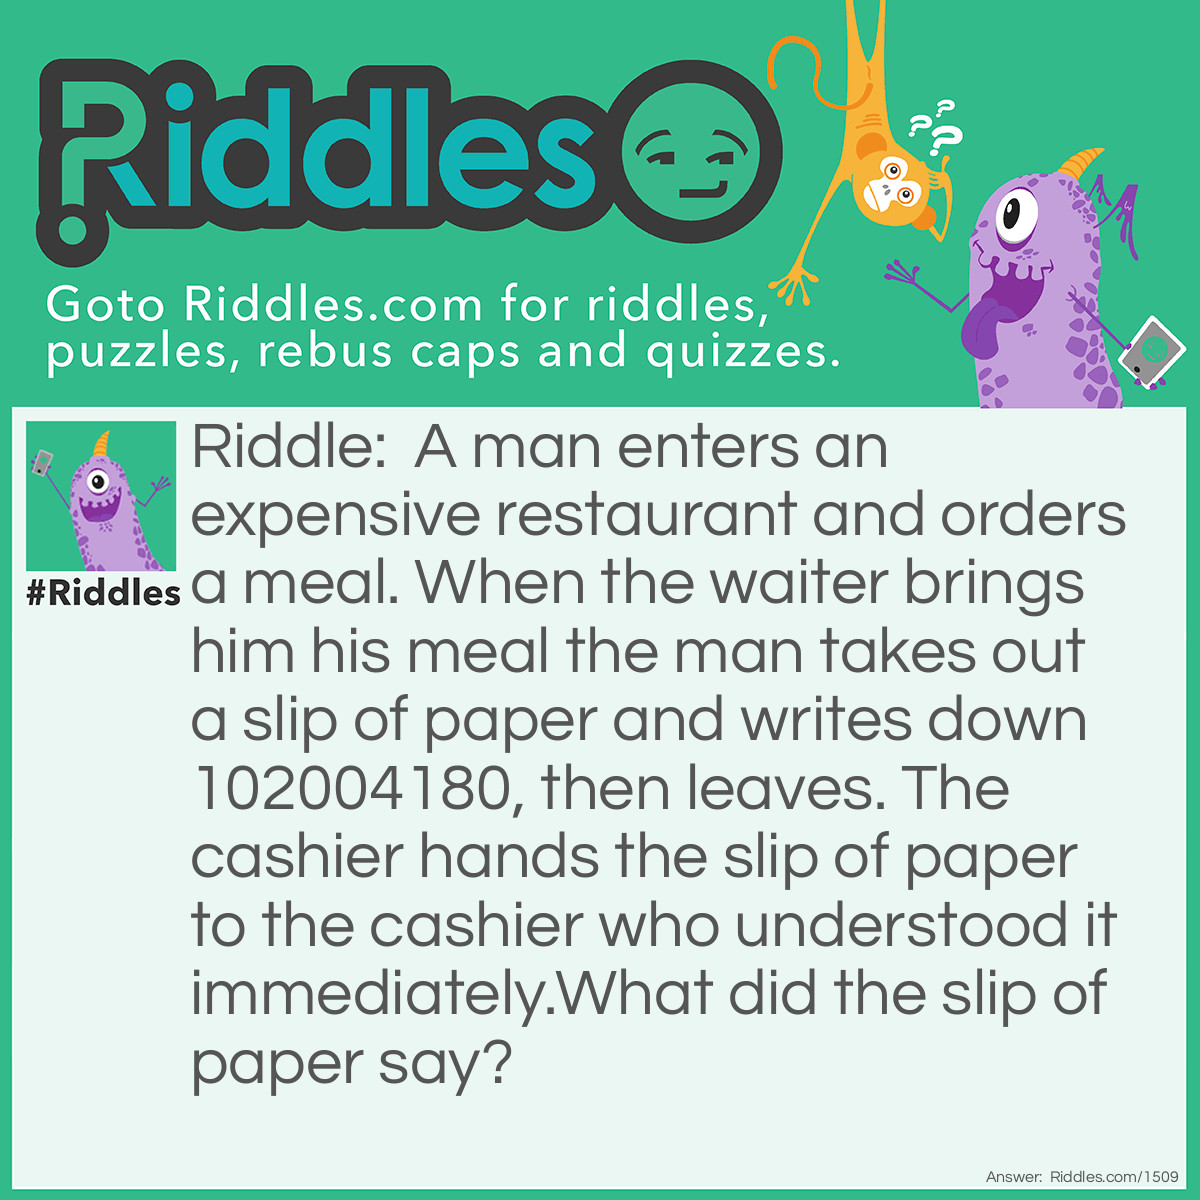 Riddle: A man enters an expensive restaurant and orders a meal. When the waiter brings him his meal the man takes out a slip of paper and writes down 102004180, then leaves. The cashier hands the slip of paper to the cashier who understood it immediately.
What did the slip of paper say? Answer: I =1, 0=Ought, 2=To, 0=Owe, 0=Nothing, 4=For, 1=I, 8=Ate, 0=Nothing. I Ought To Owe Nothing For I Ate Nothing. 102004180